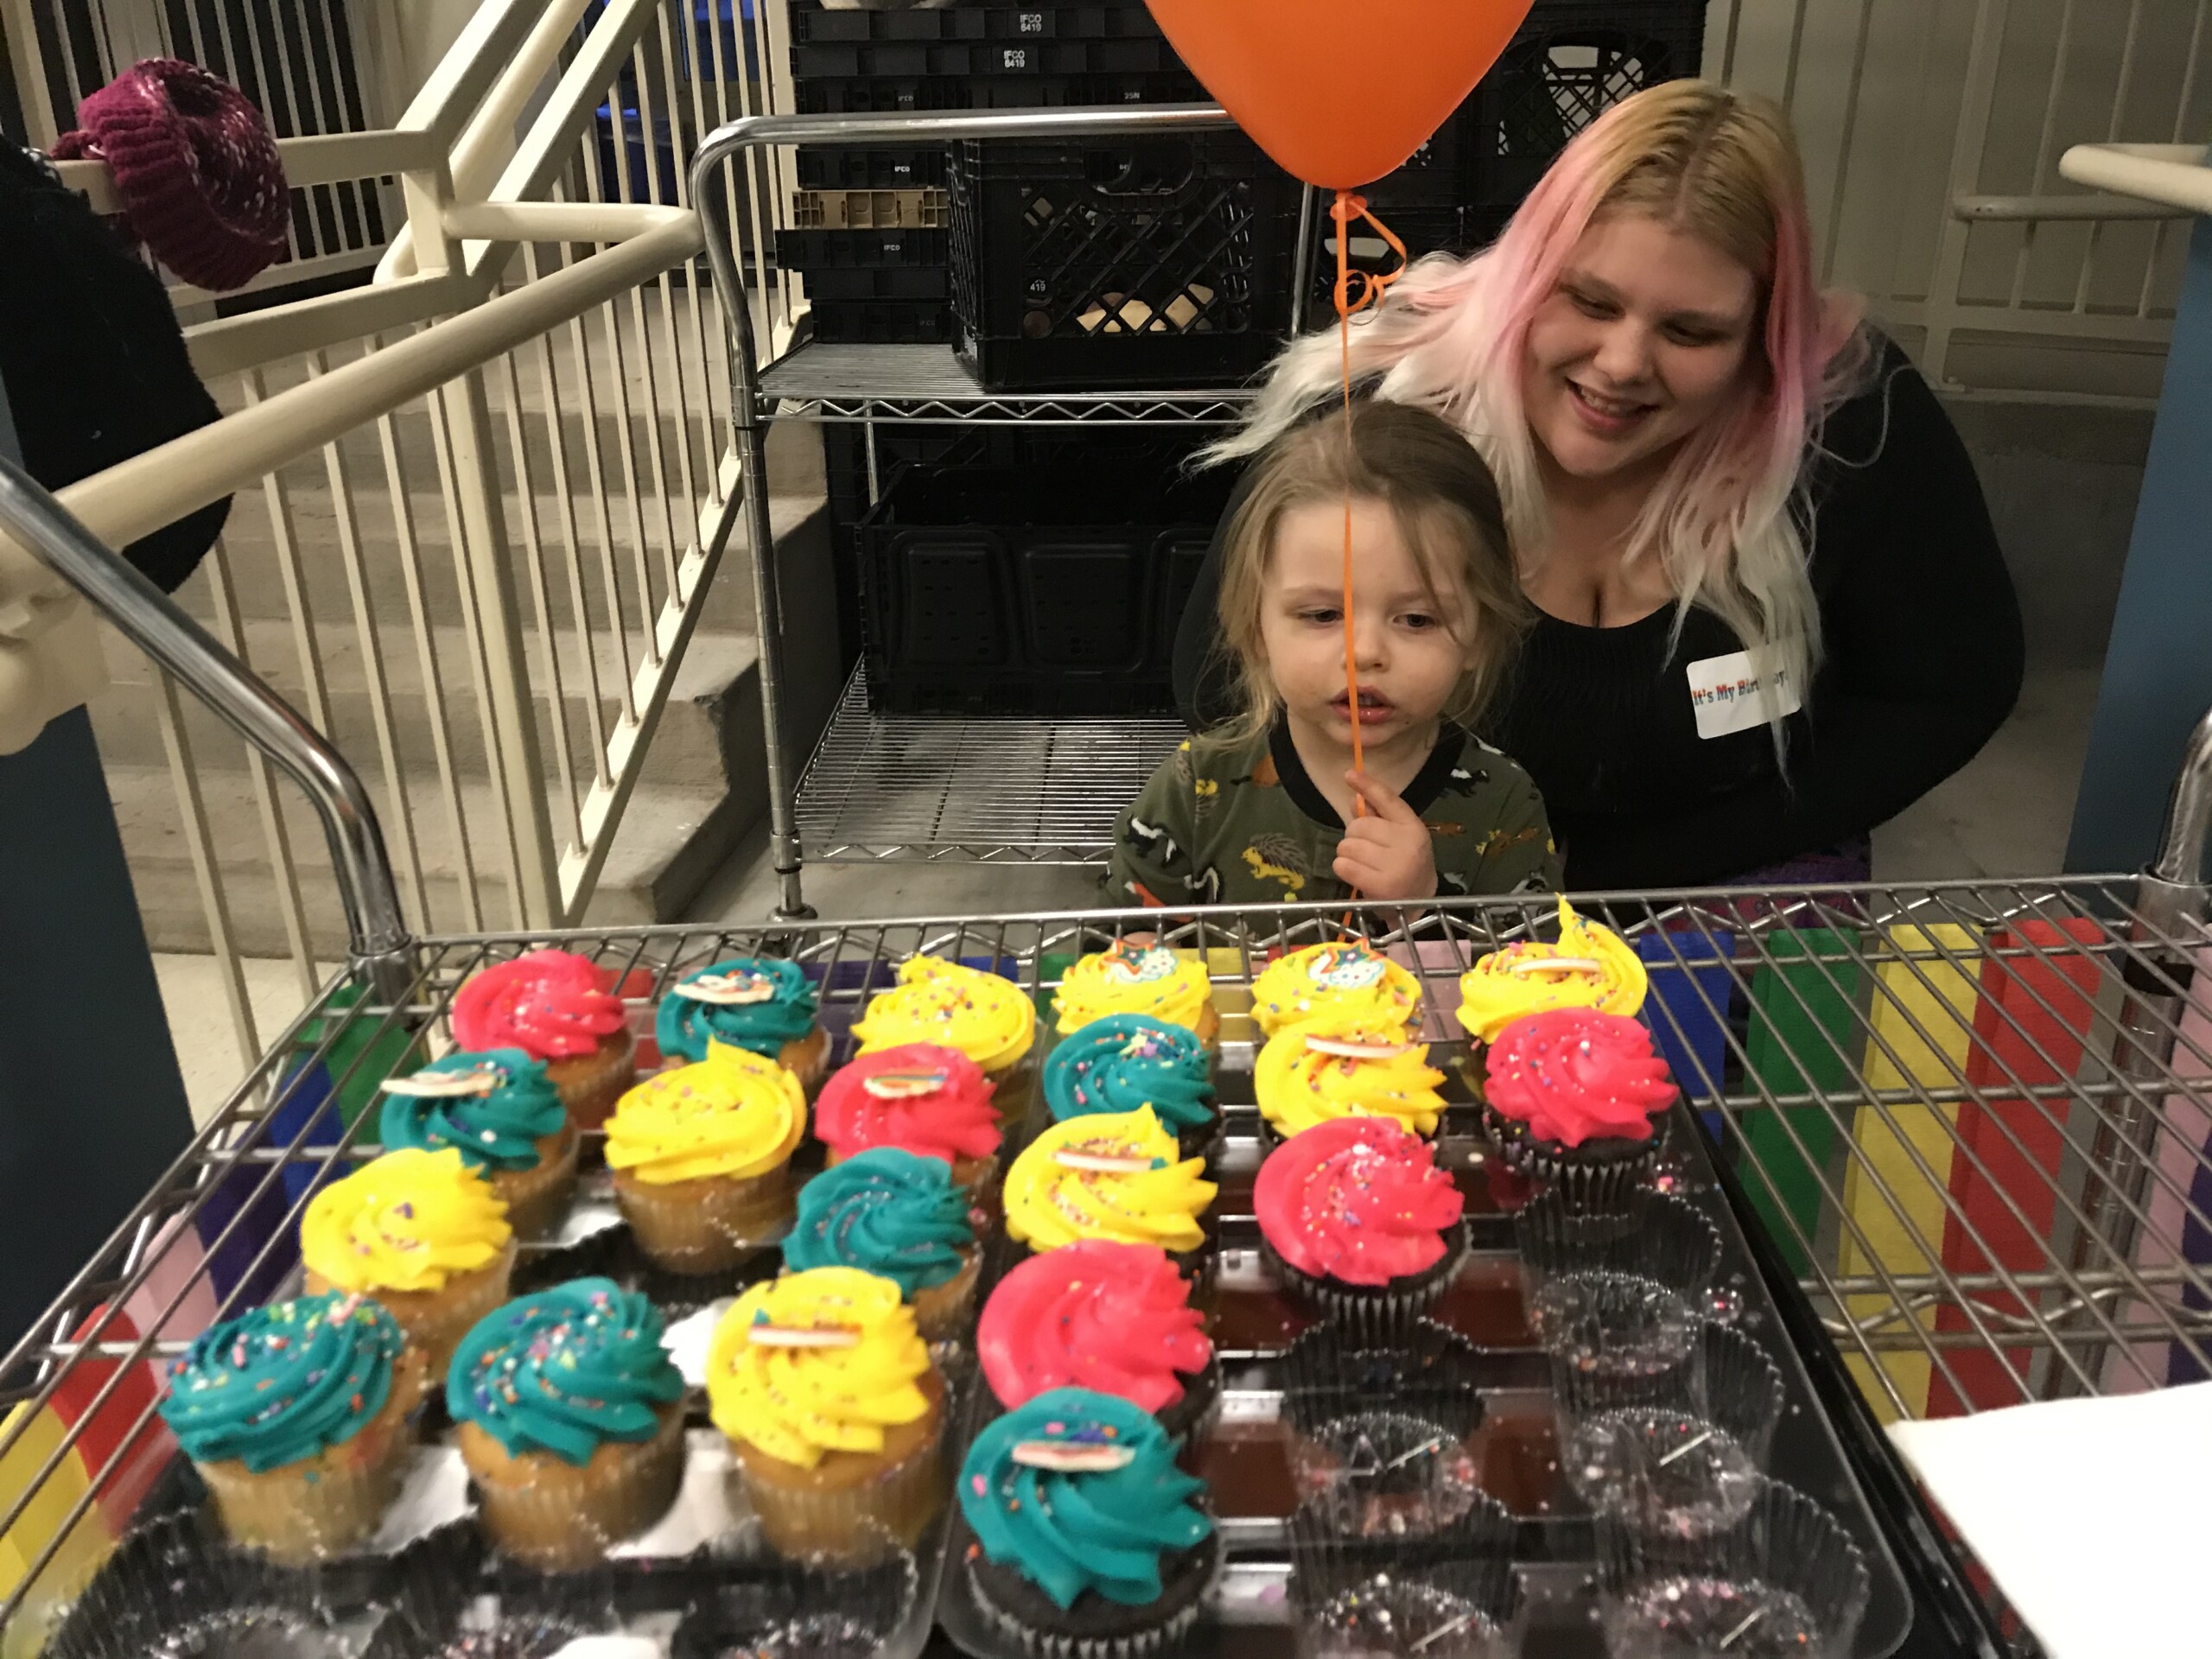 Child and Mother looking at some cupcakes